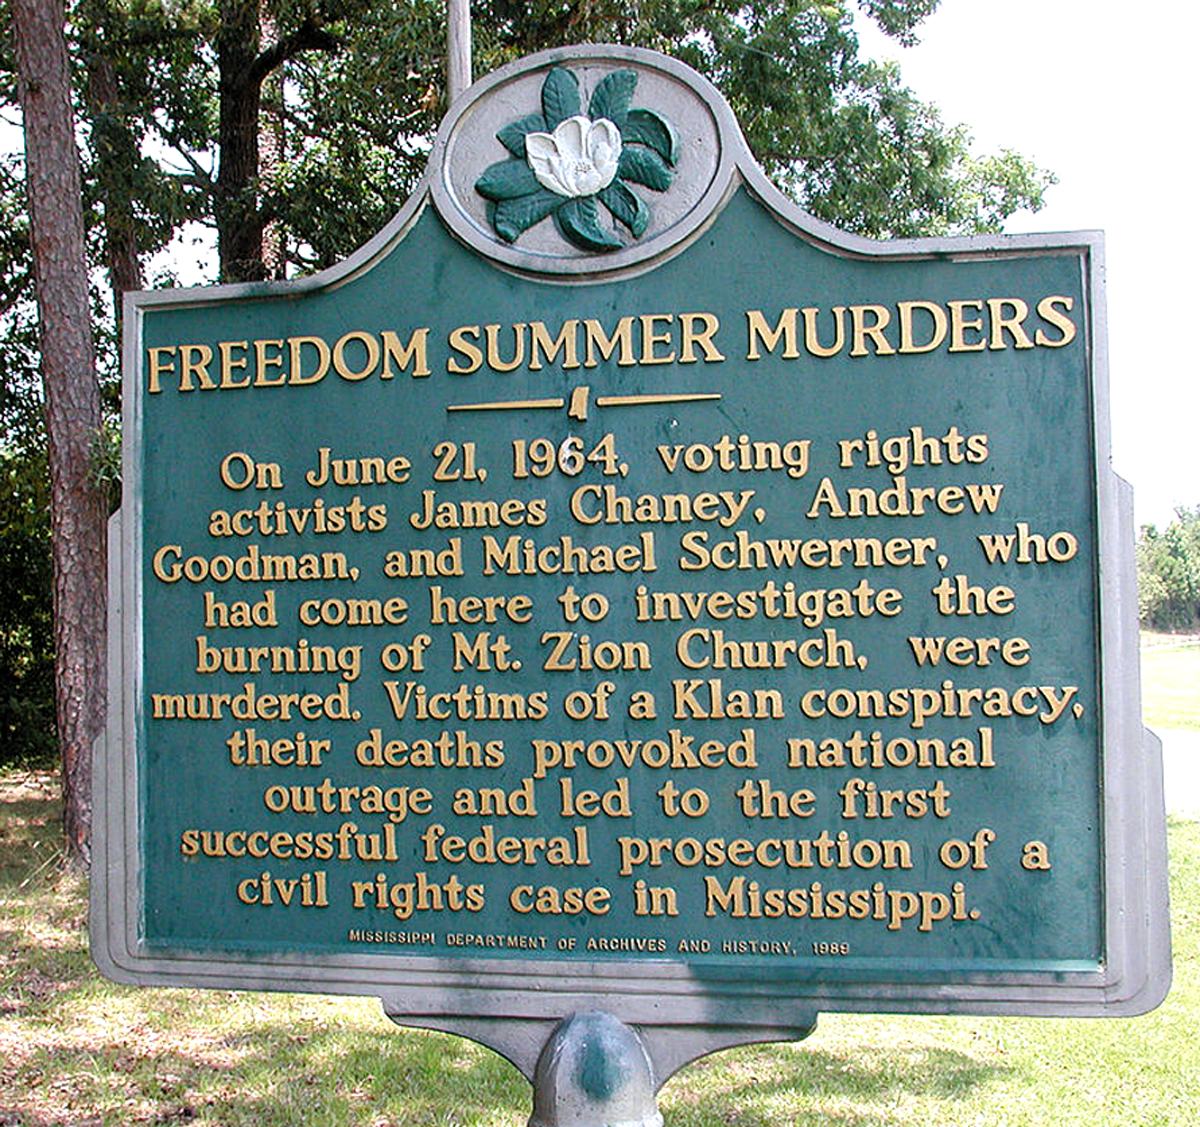 "Freedom Summer Murders." Civil rights activists James Chaney, Andrew Goodman and Michael Schwerner in Mississippi, victims of  Klan conspiracy.